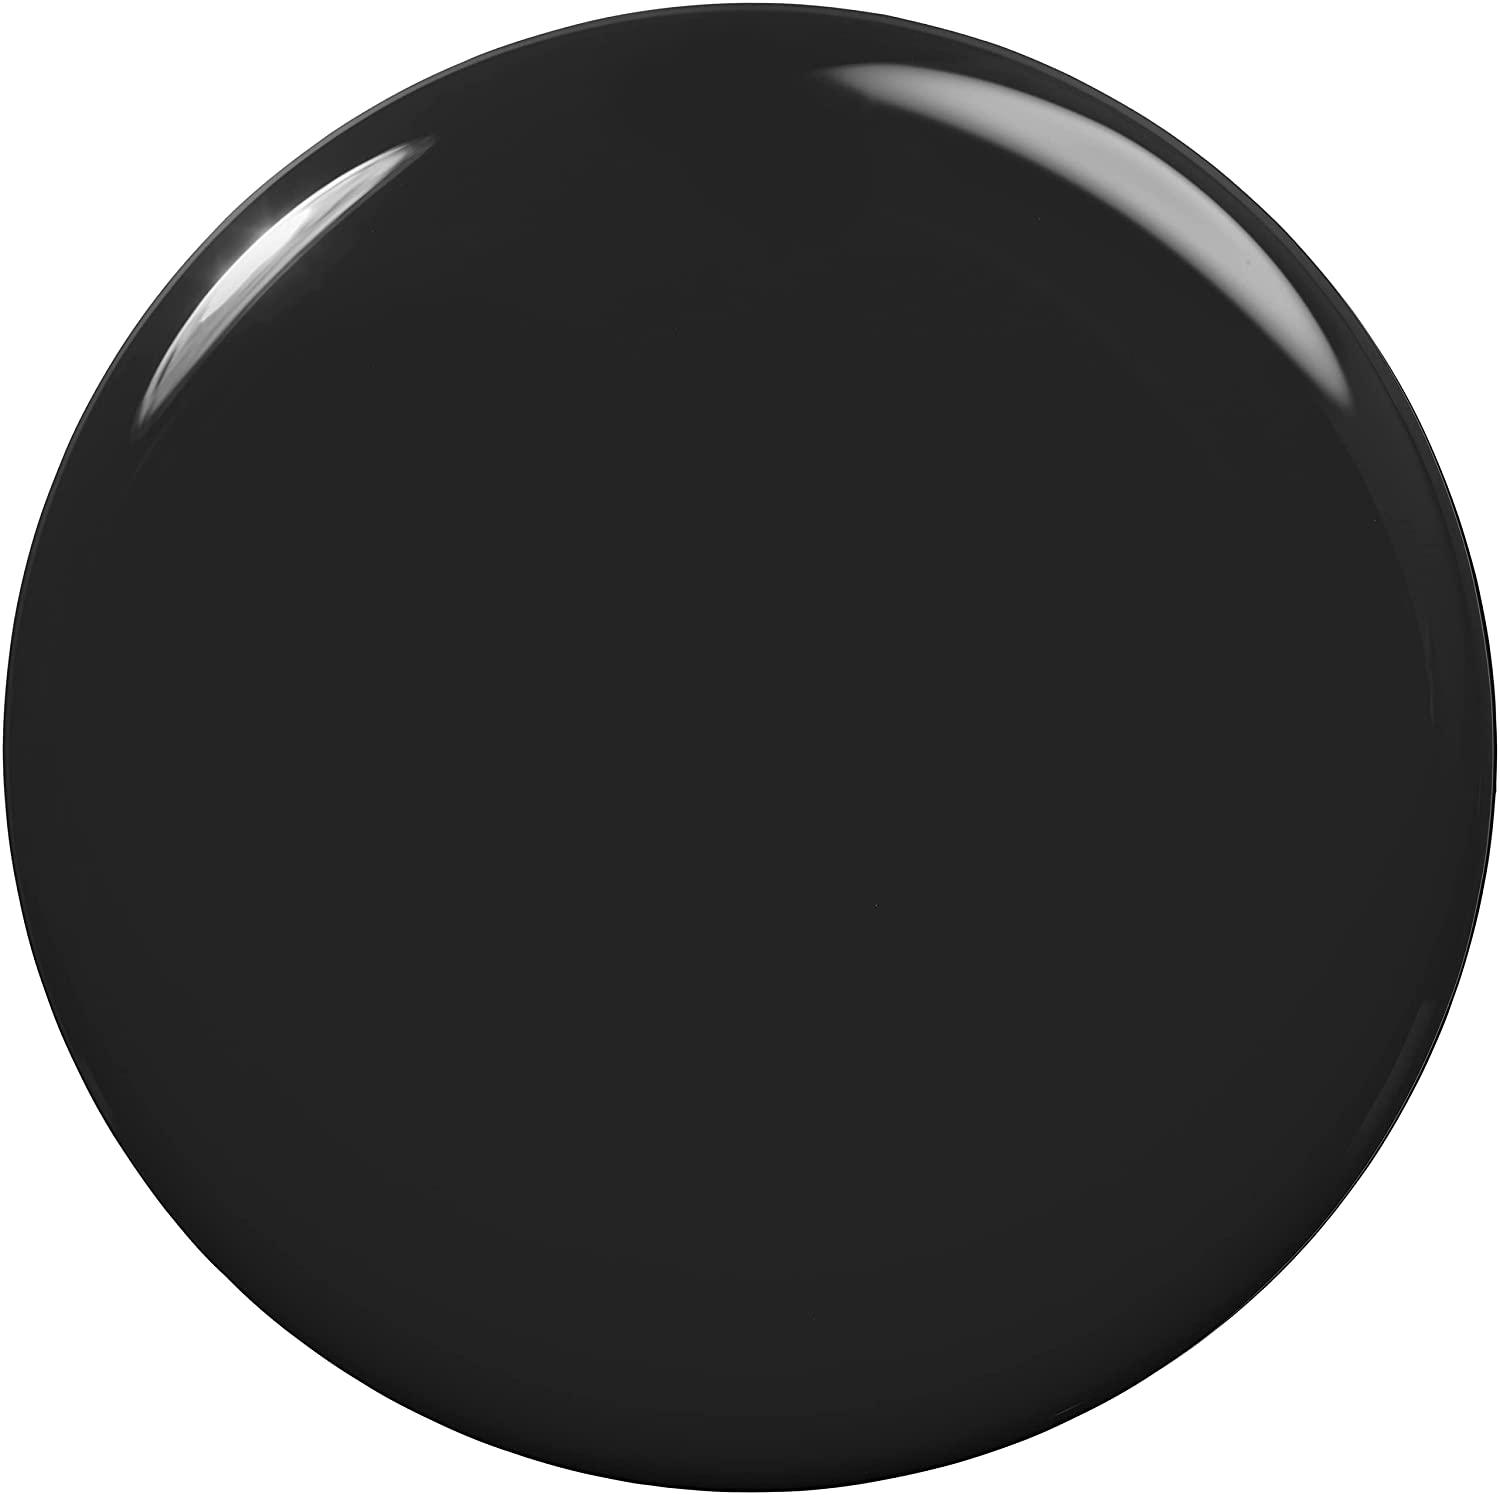 essie expressie Quick-Dry Vegan Nail Polish, Now Or Never, Black, 0.33  Ounce 0.33 Fl Oz (Pack of 1) 380 now or never (black)